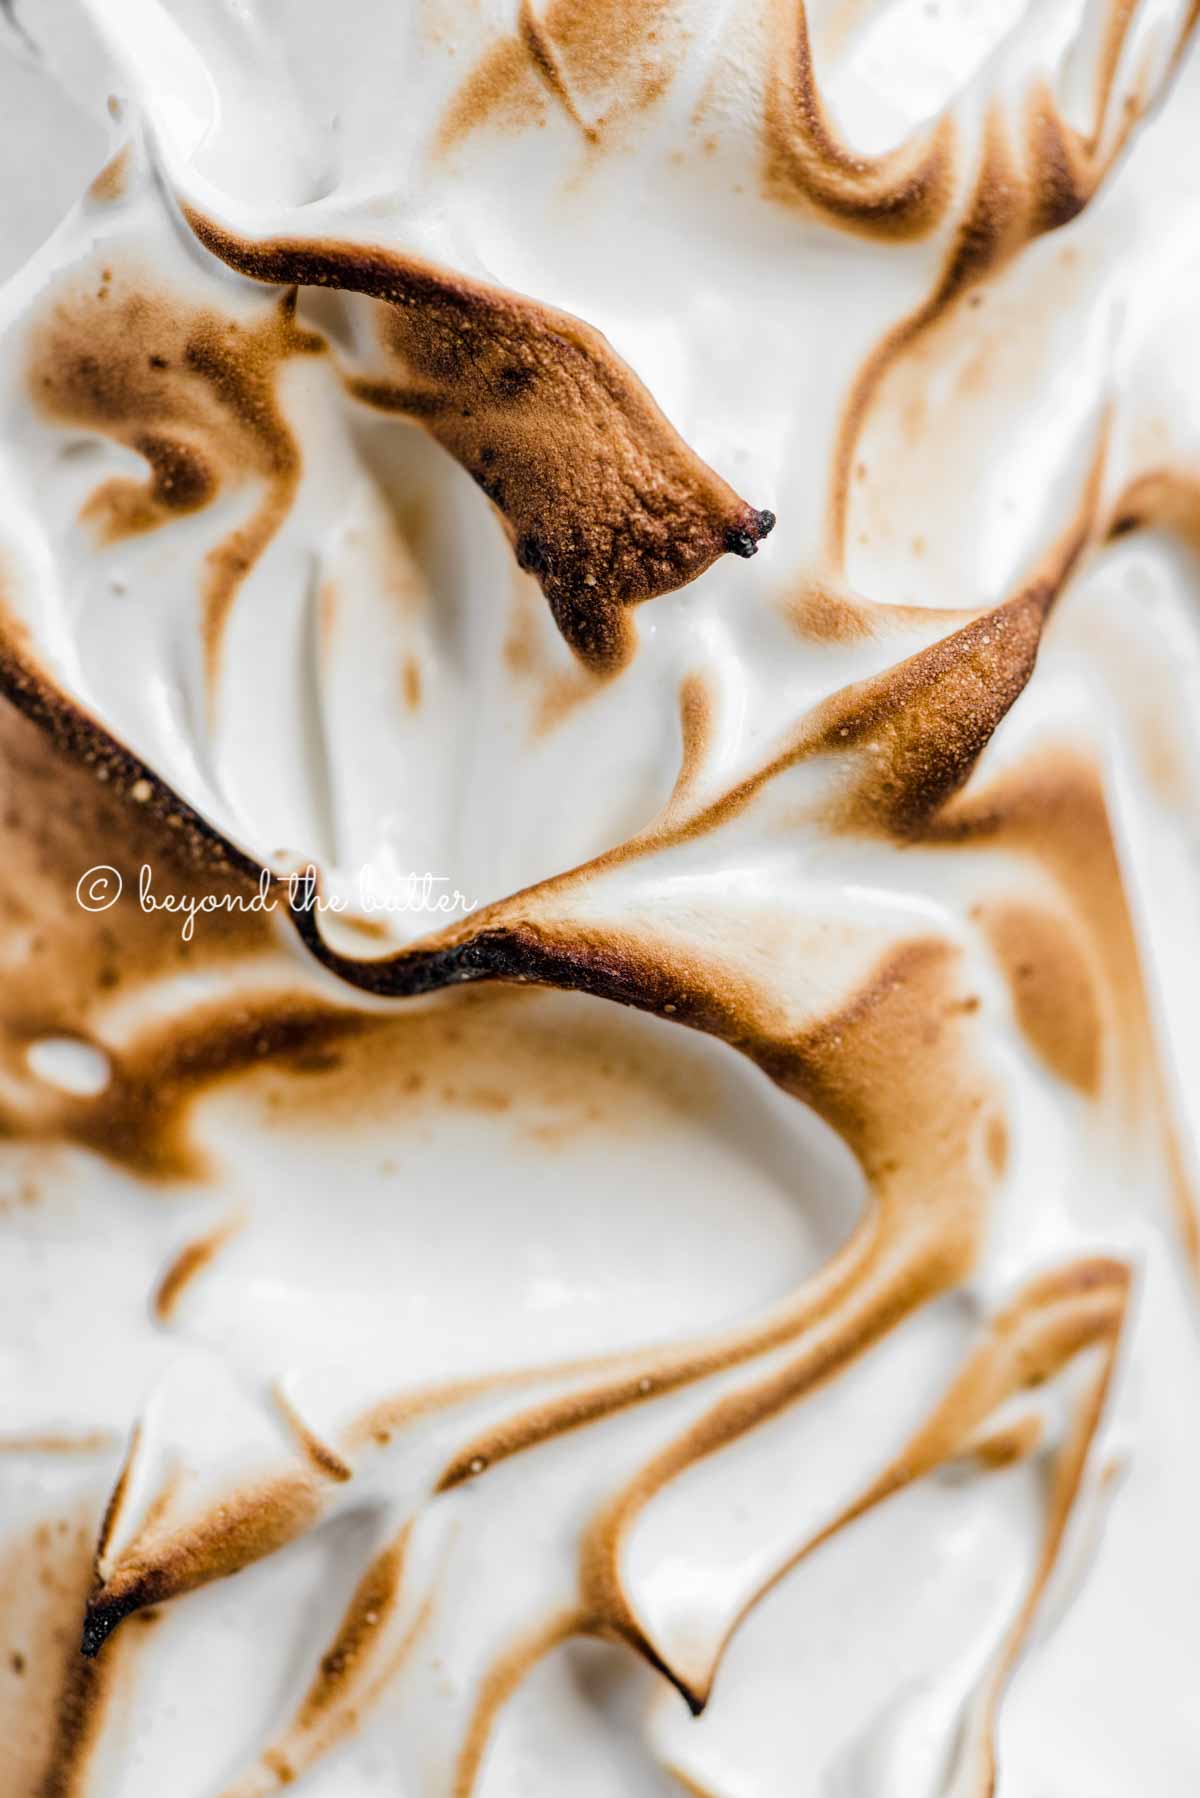 Close up image of toasted marshmallow meringue topping | All Images © Beyond the Butter™